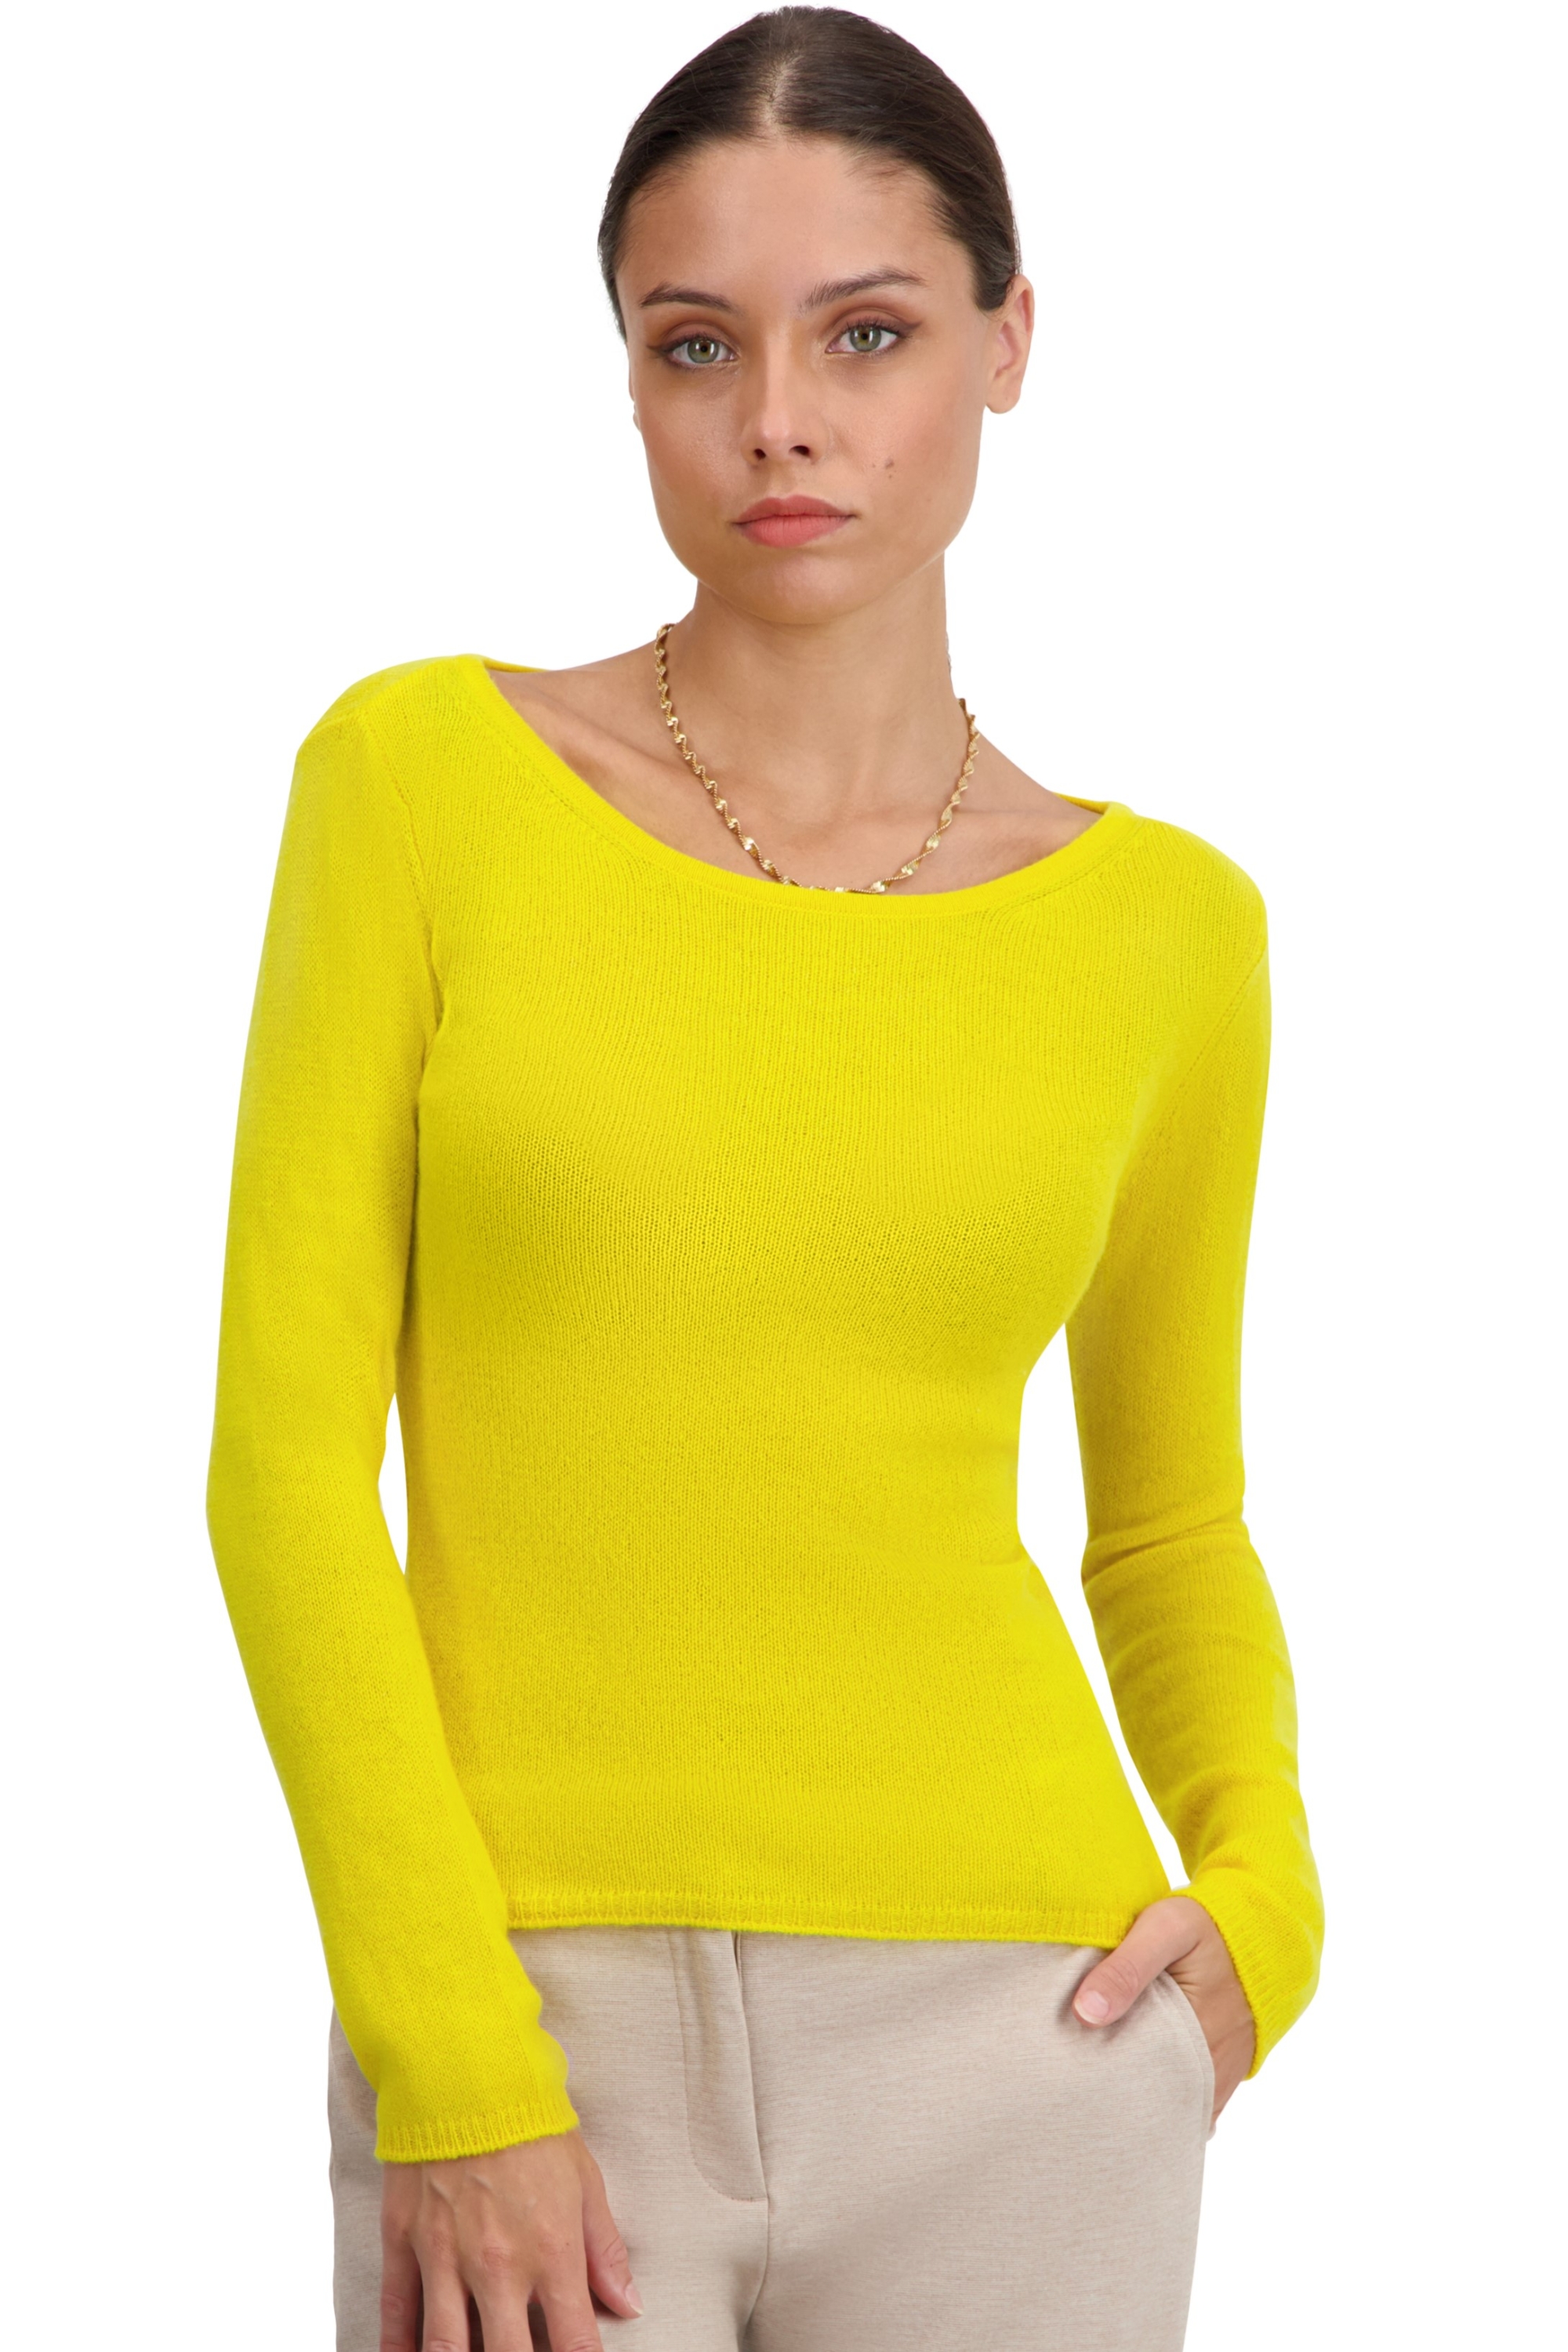 Cashmere ladies basic sweaters at low prices caleen cyber yellow xs